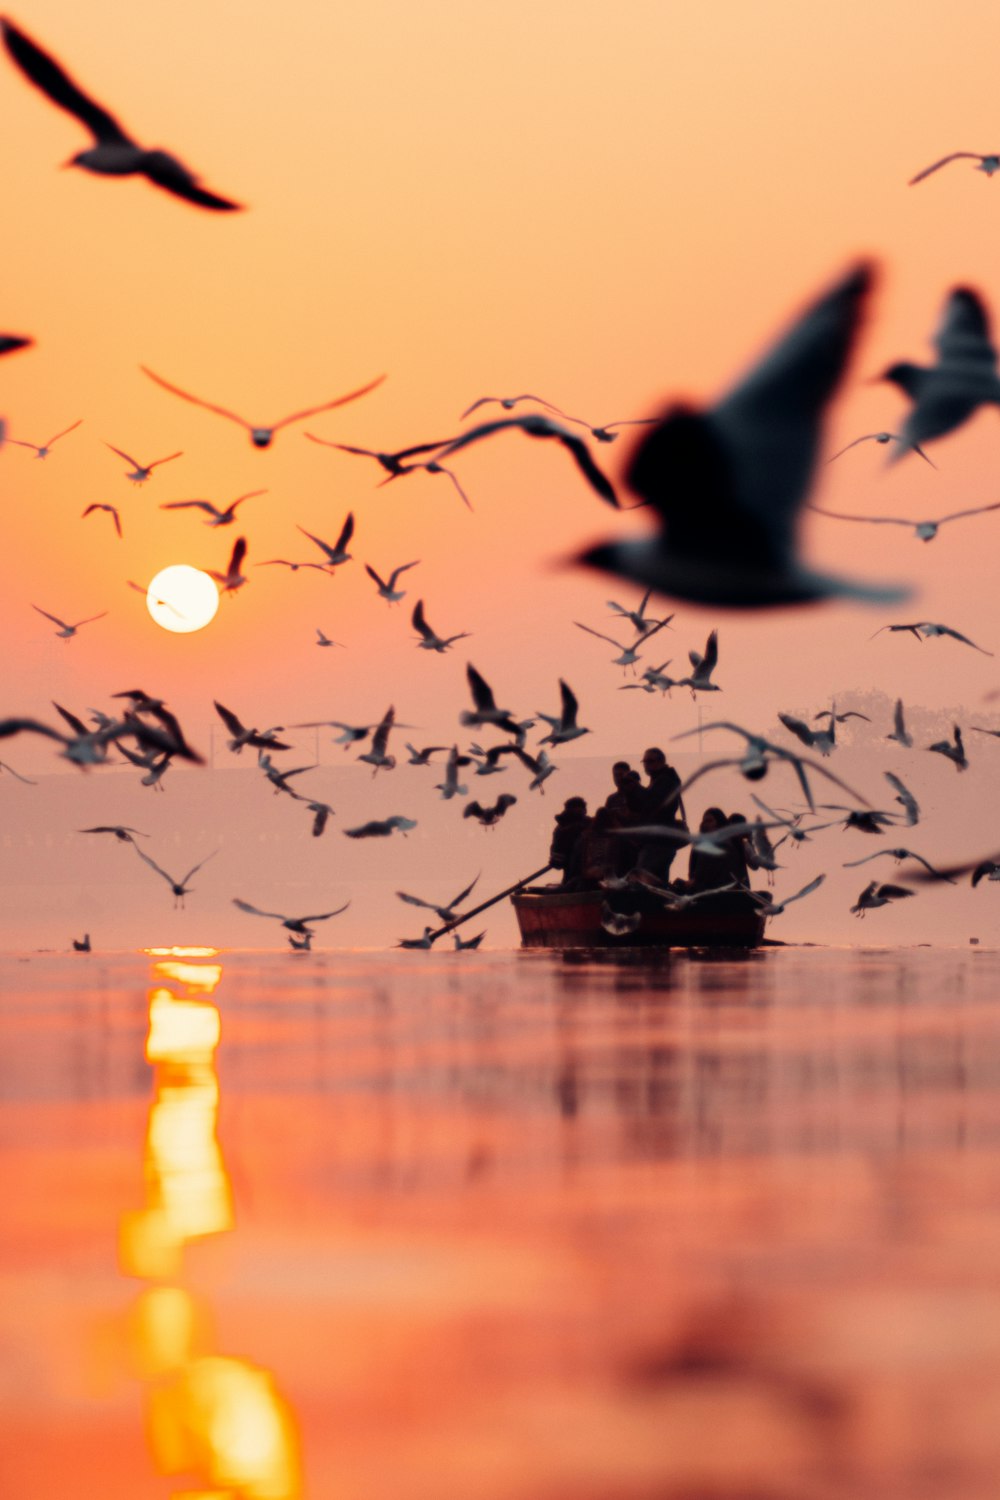 a flock of birds flying over a boat in the ocean